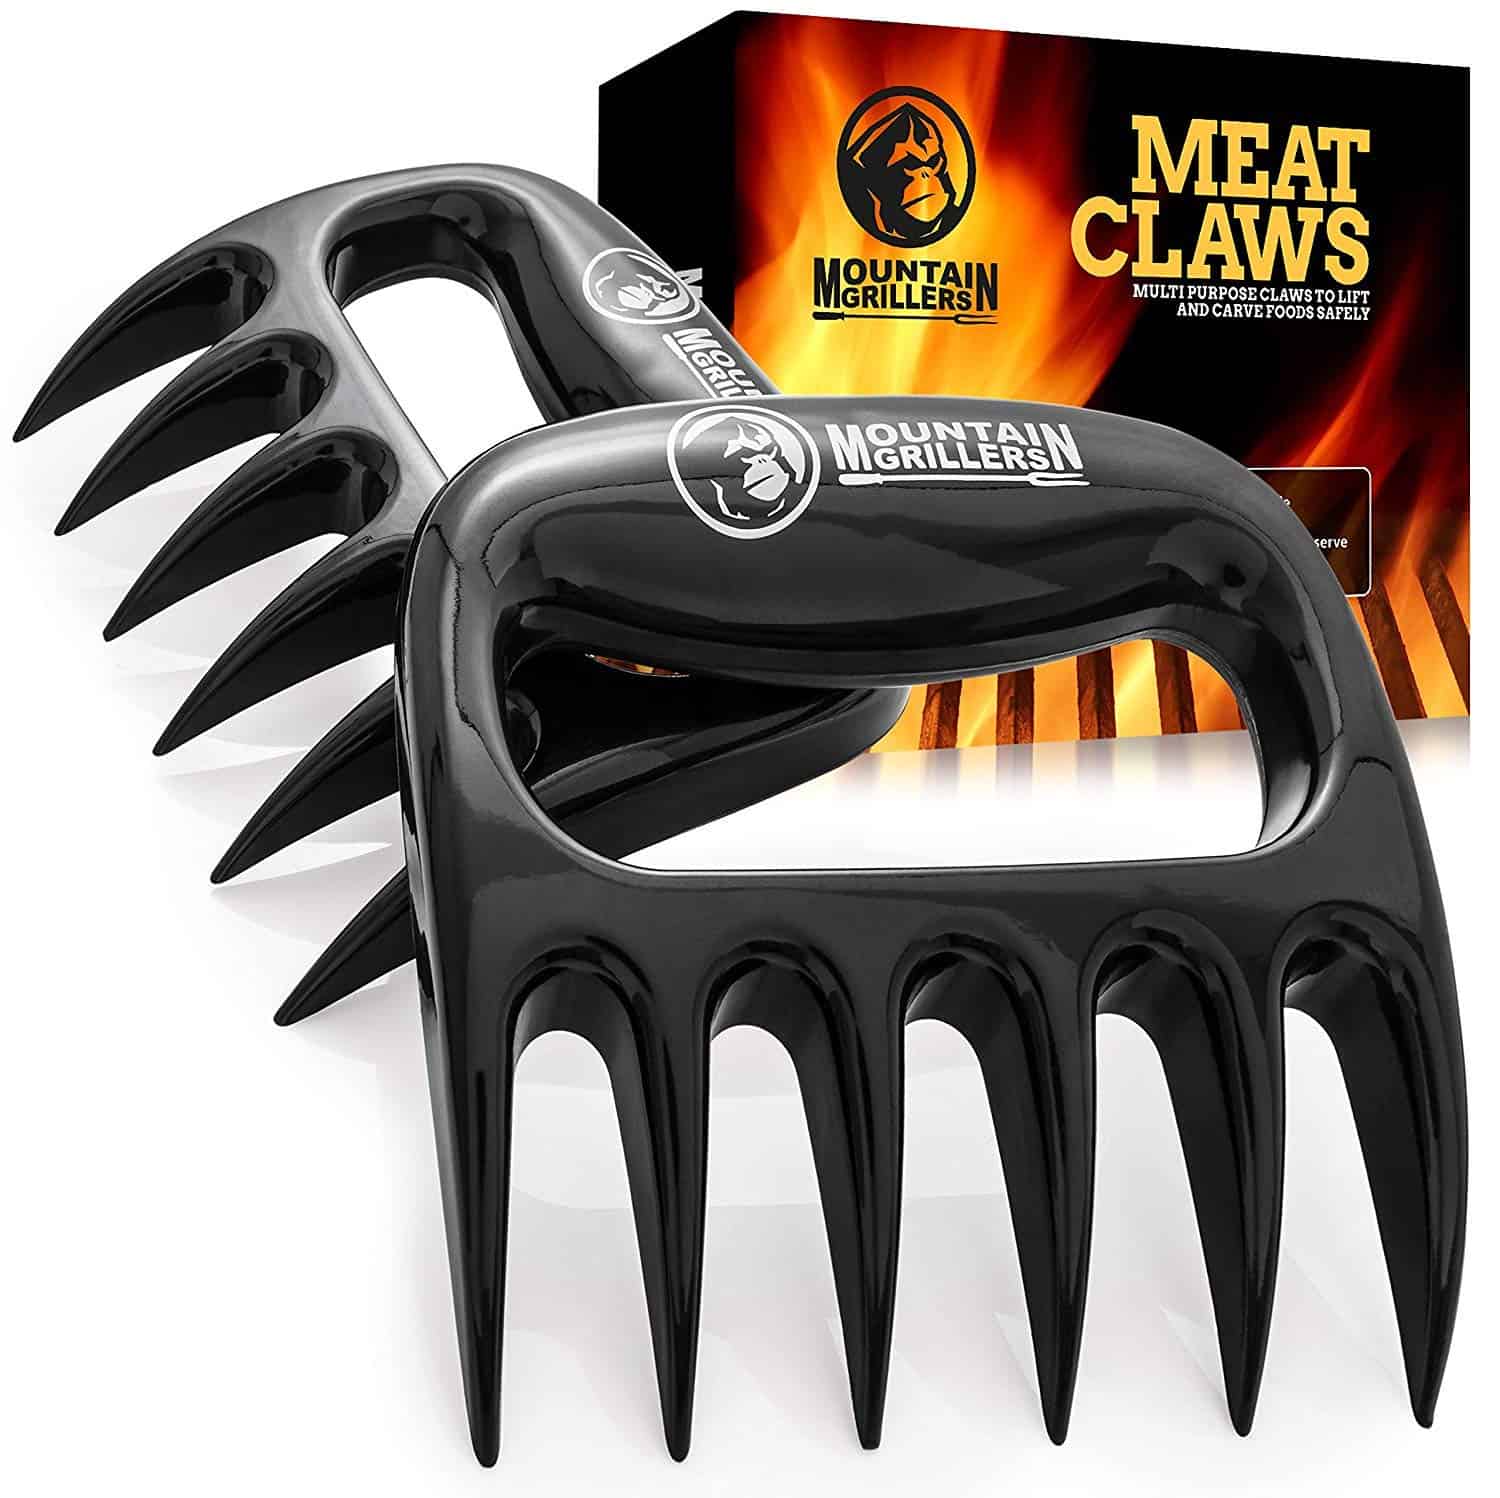 Mountain grillers meat shredder claws